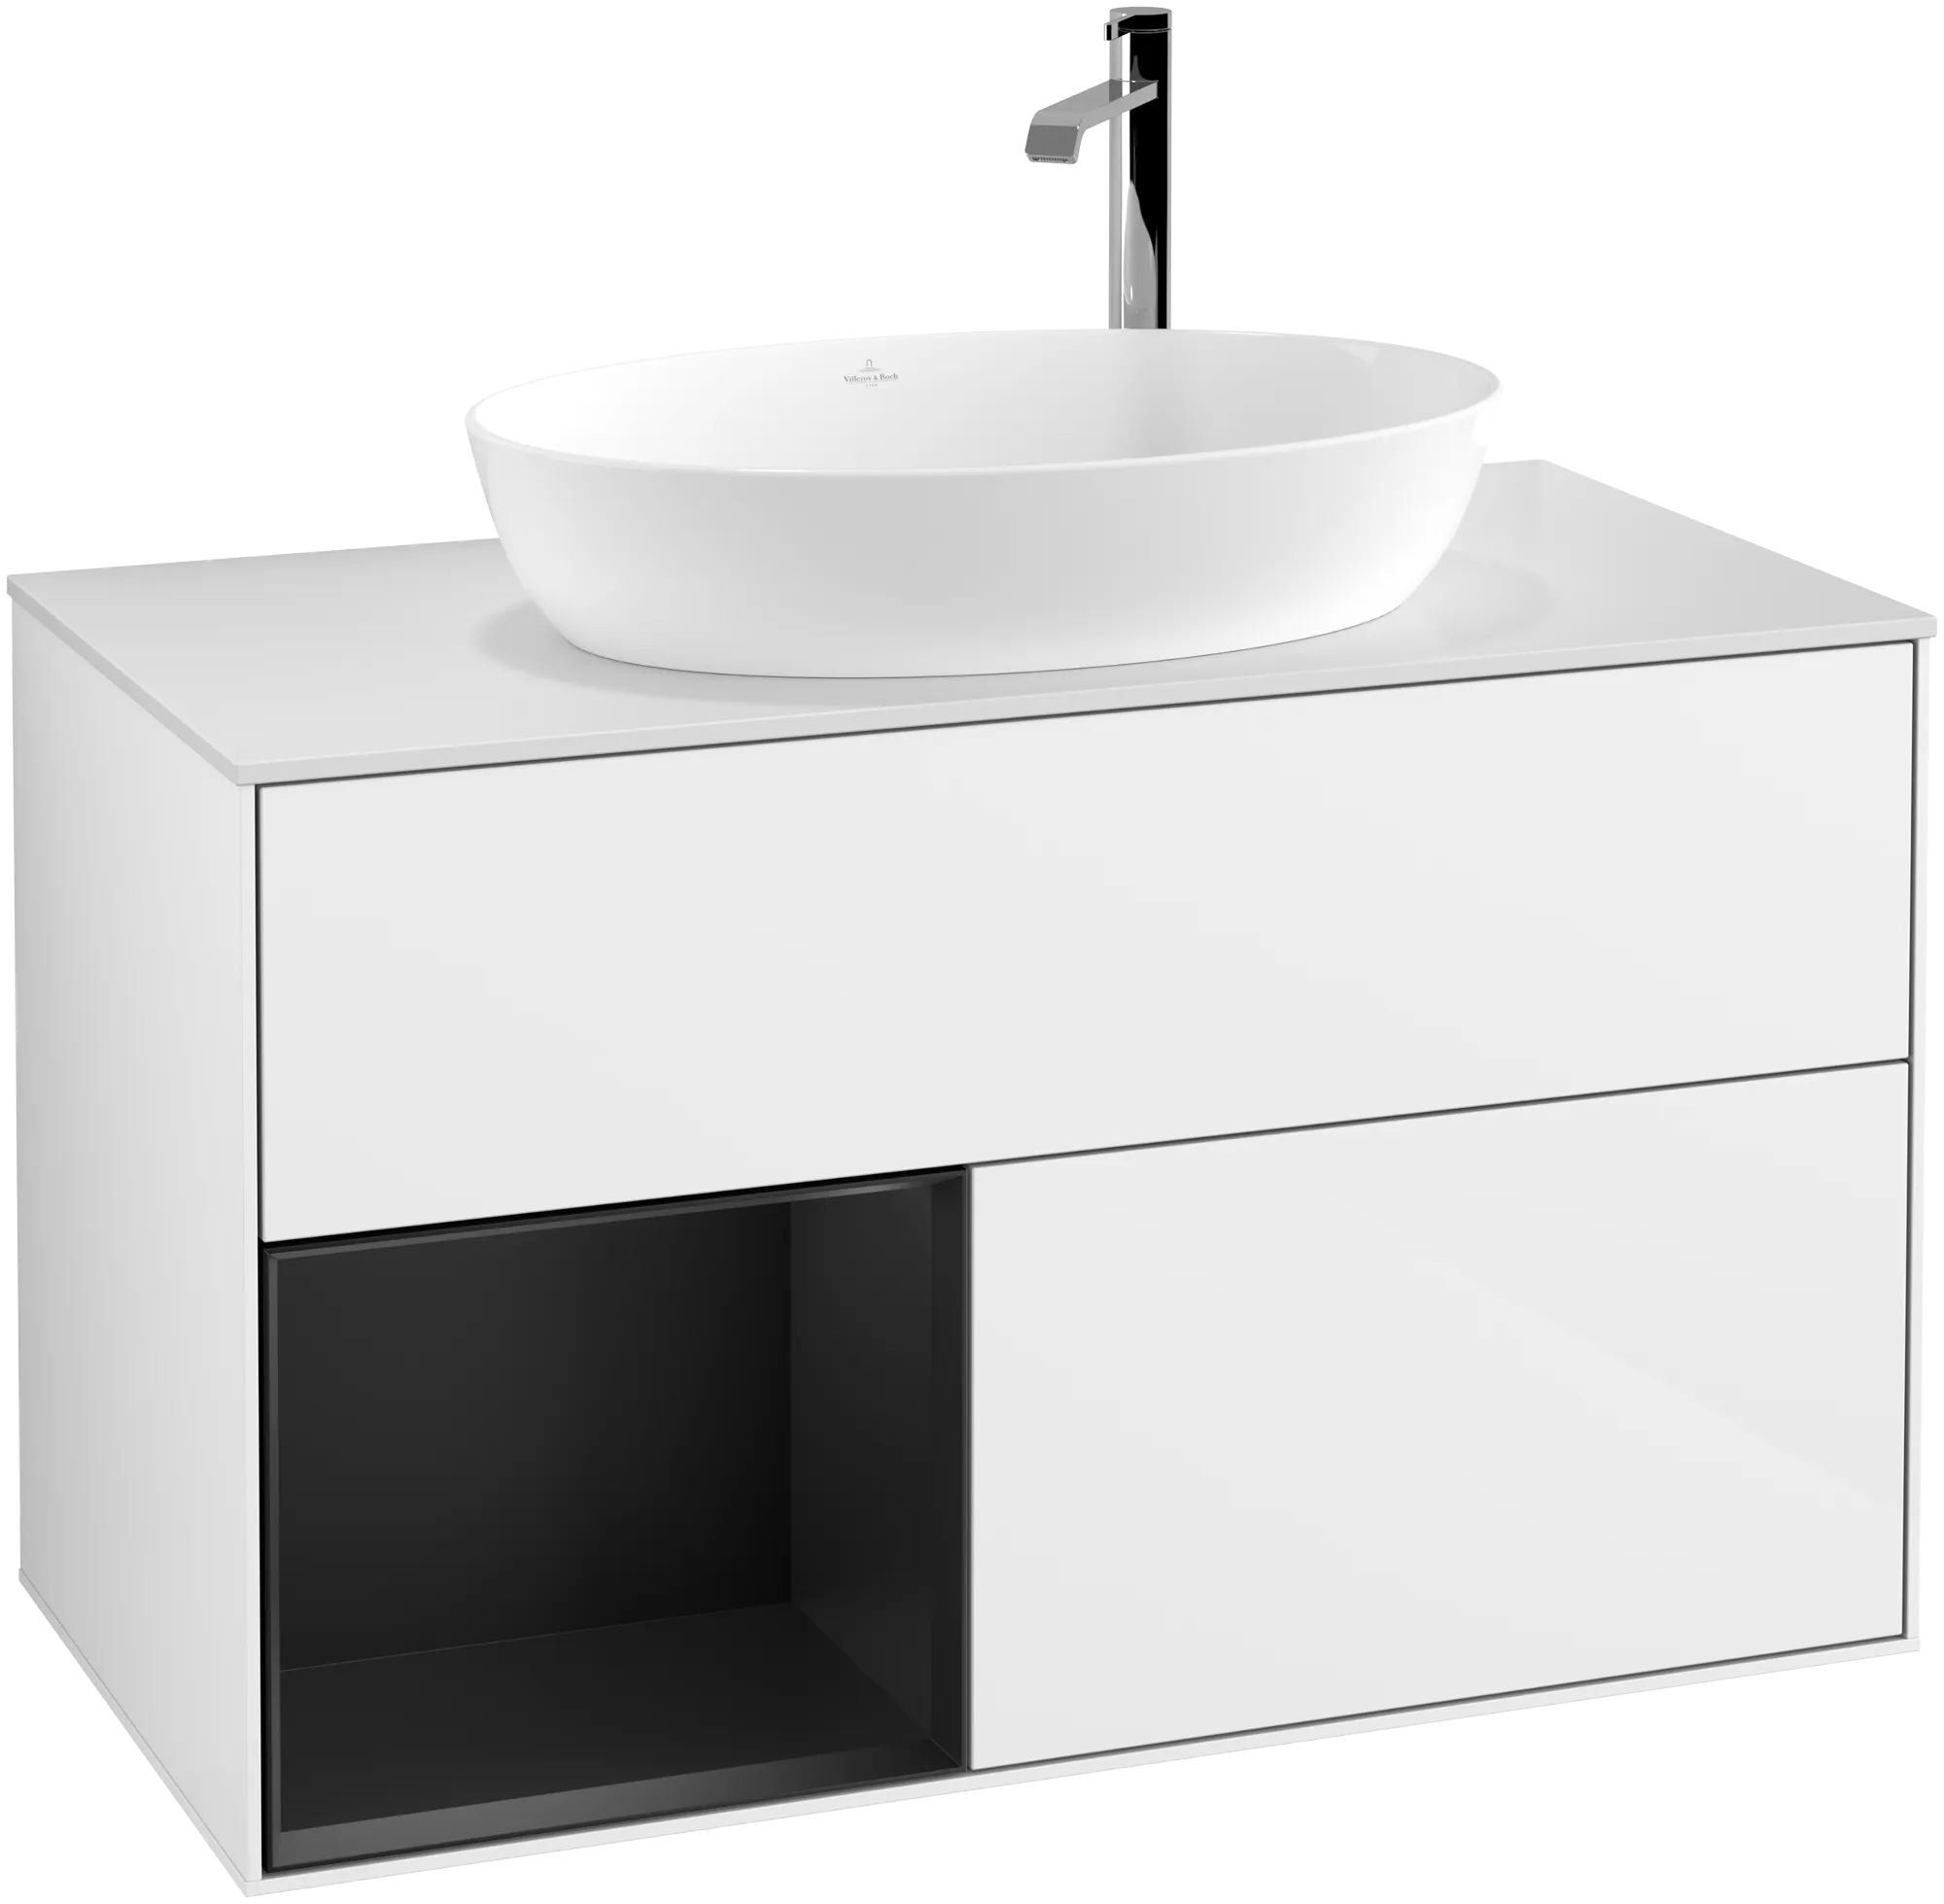 Obrázek VILLEROY BOCH Finion Vanity unit, with lighting, 2 pull-out compartments, 1000 x 603 x 501 mm, Glossy White Lacquer / Black Matt Lacquer / Glass White Matt #G891PDGF